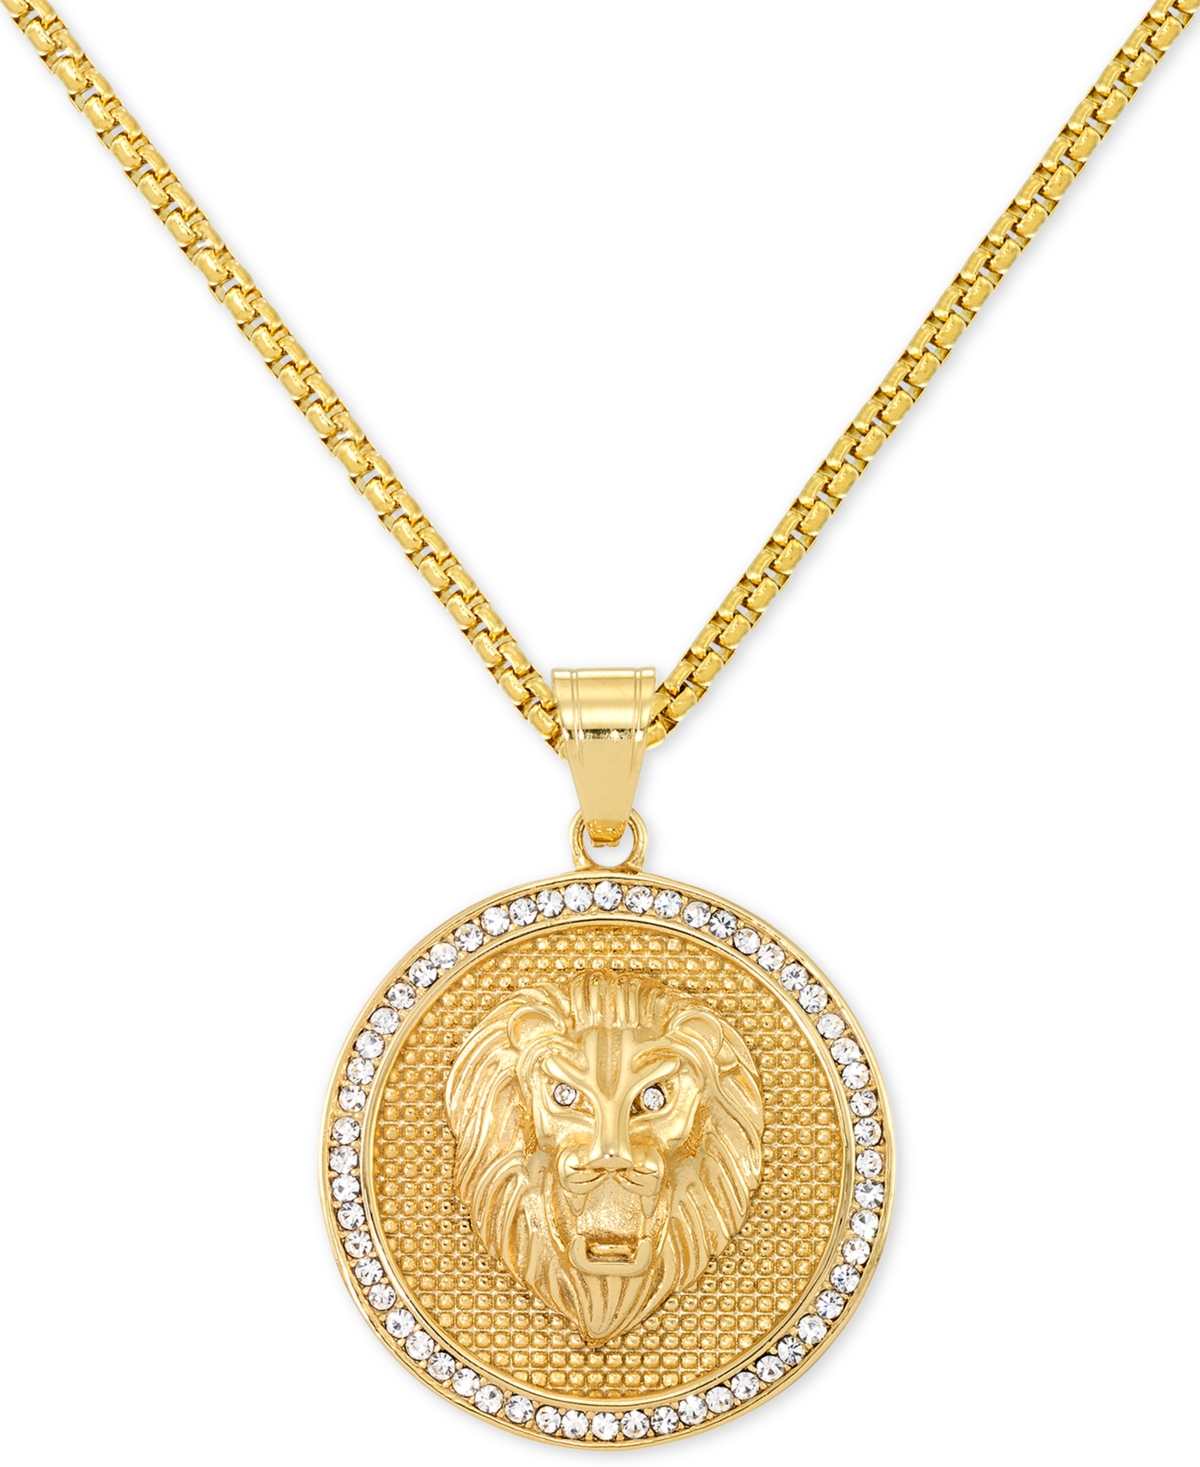 Smith Men's Crystal Lion Medallion 24" Pendant Necklace in Yellow Ion-Plated Stainless Steel - Gold Tone